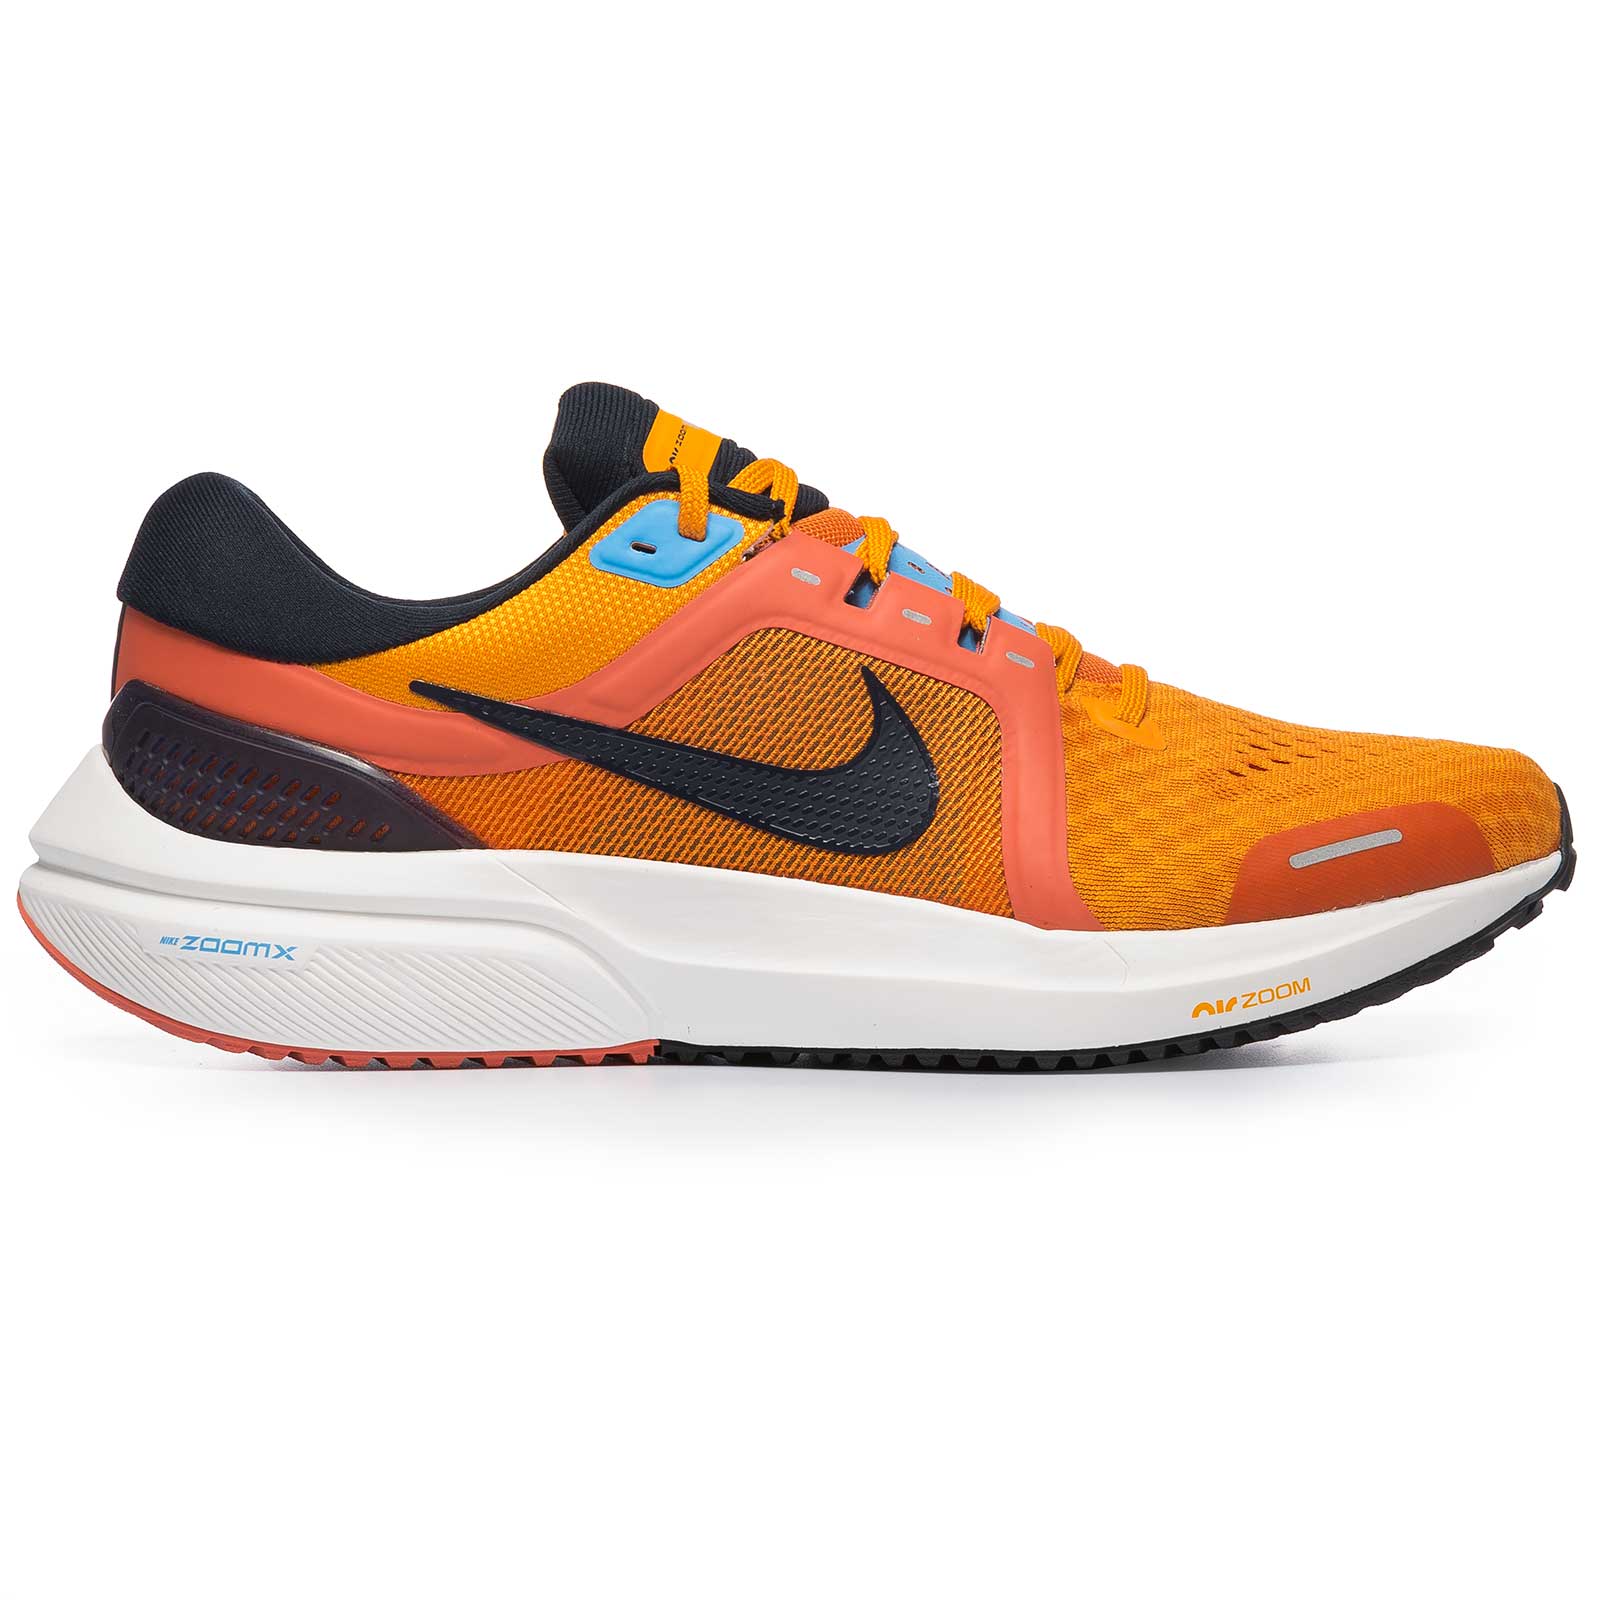 NIKE AIR ZOOM VOMERO 16 MENS RUNNING SHOES